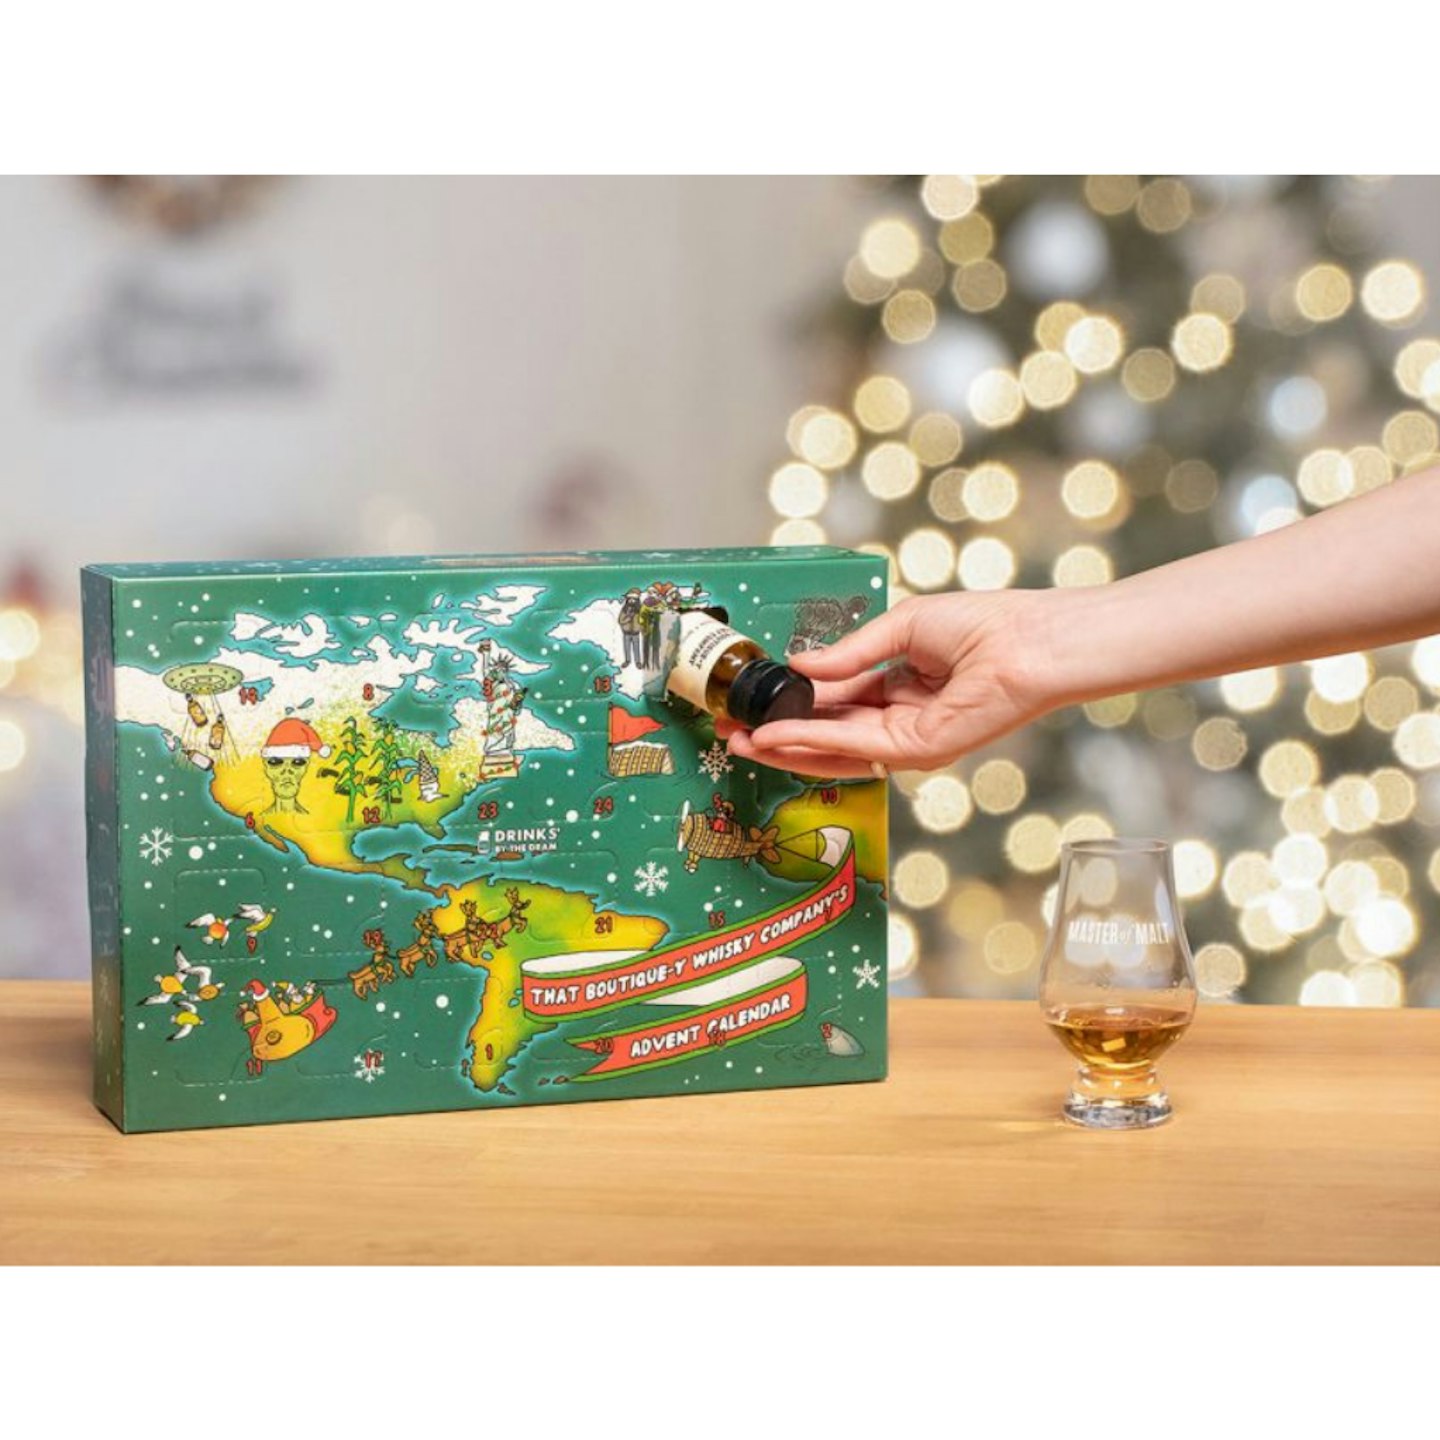 MASTER OF MALT That Boutique Y Whisky Company Advent Calendar